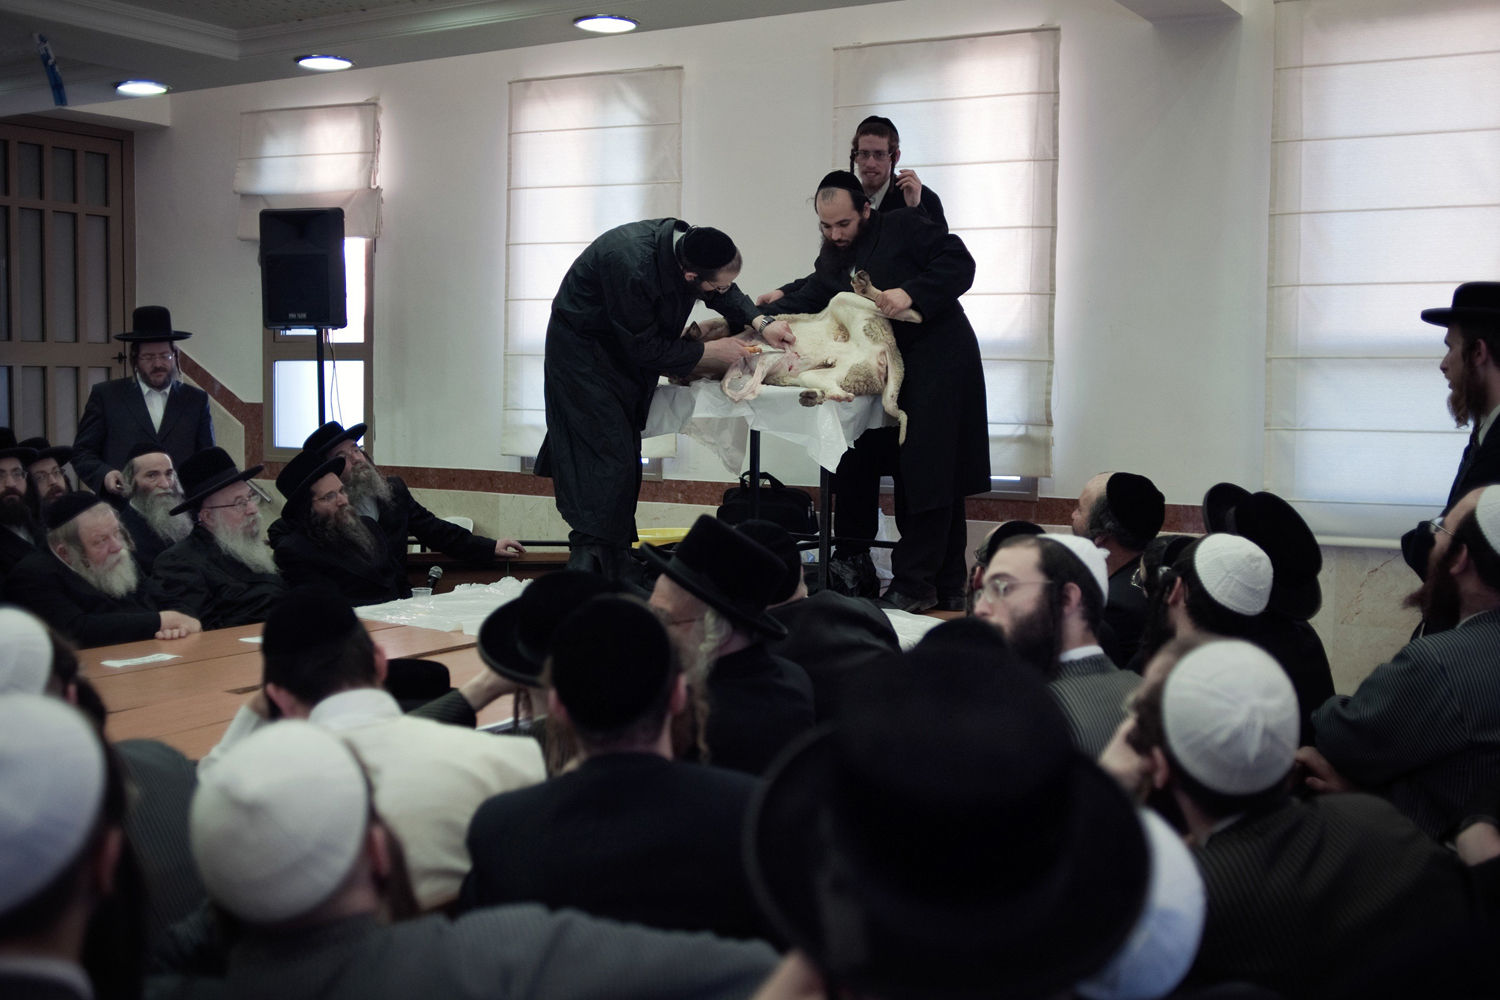 Oct. 24, 2013. An Ultra-orthodox Jewish teacher shows a little community belonging to a Torah school in Mea Shearim how to slaughter a goat according to the Kosher rules, in Jerusalem, Israel.